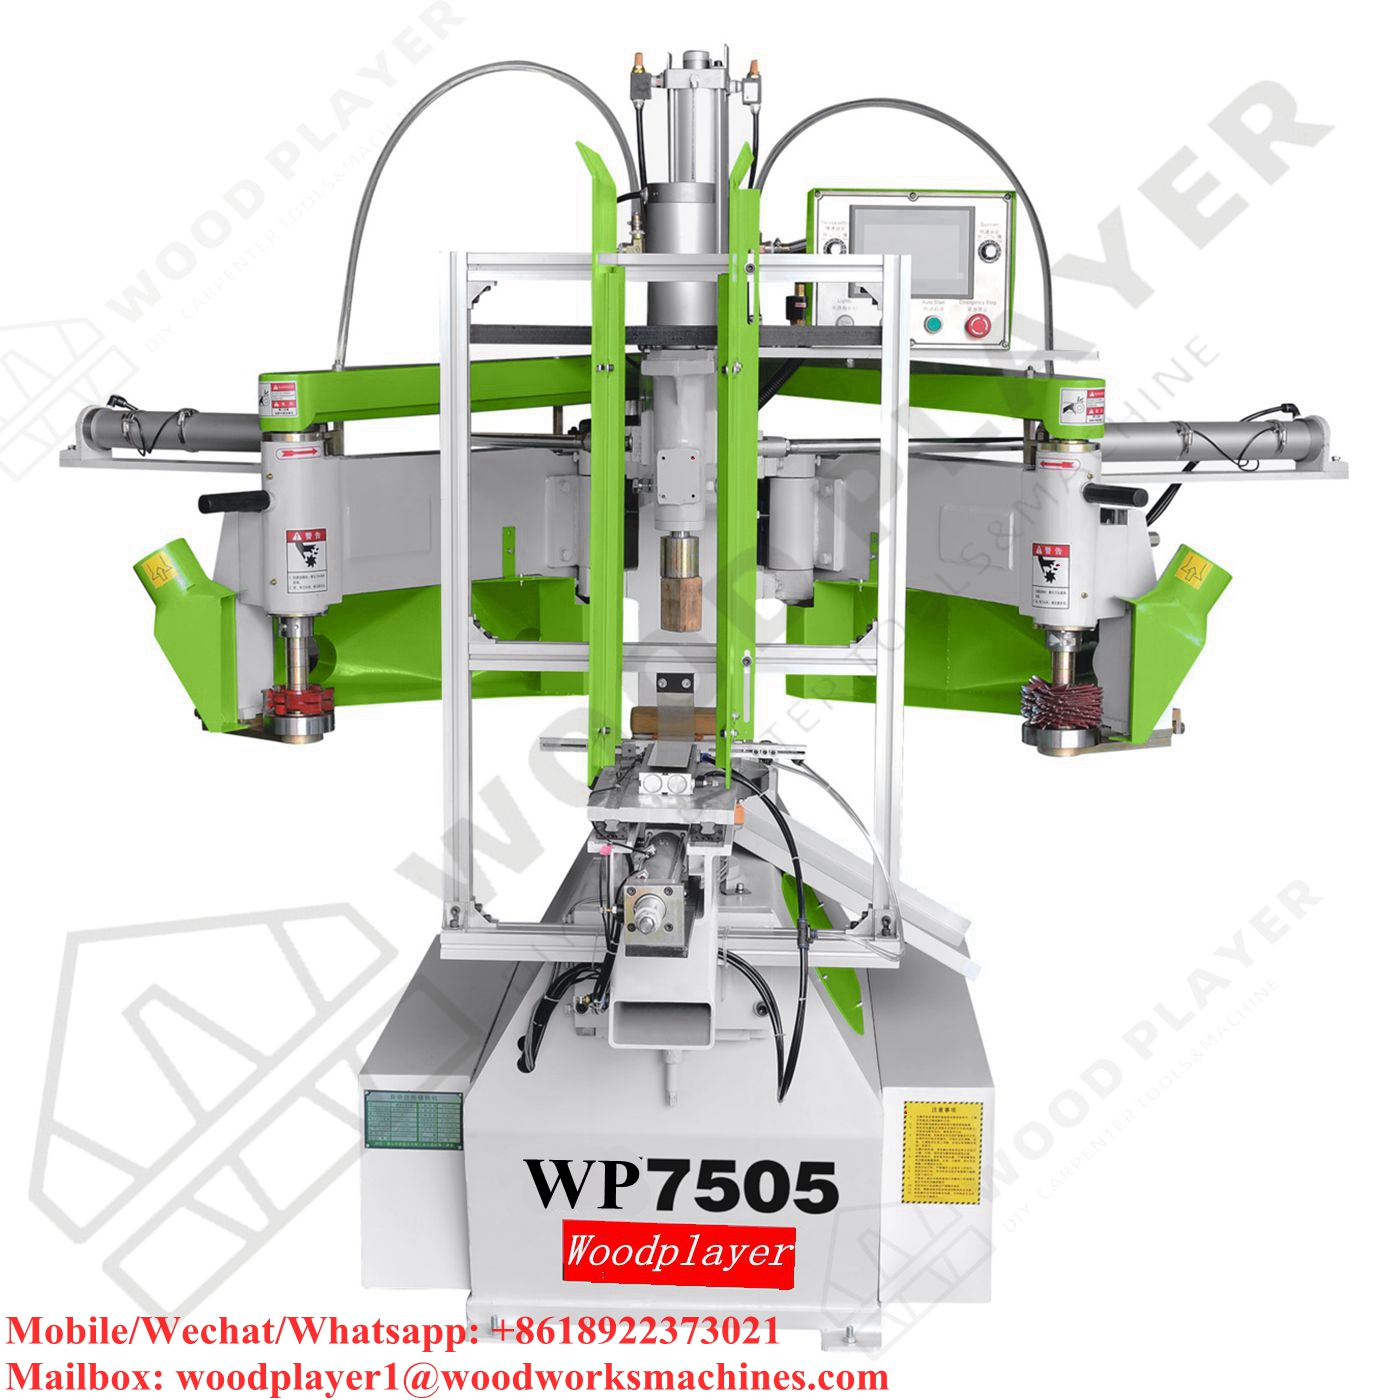 WP7505 Twin Spindles Auto Copy Shaper Fully Automatic Loading And Unloading Profiling Router Milling Belt Sanding Processable Handicrafts